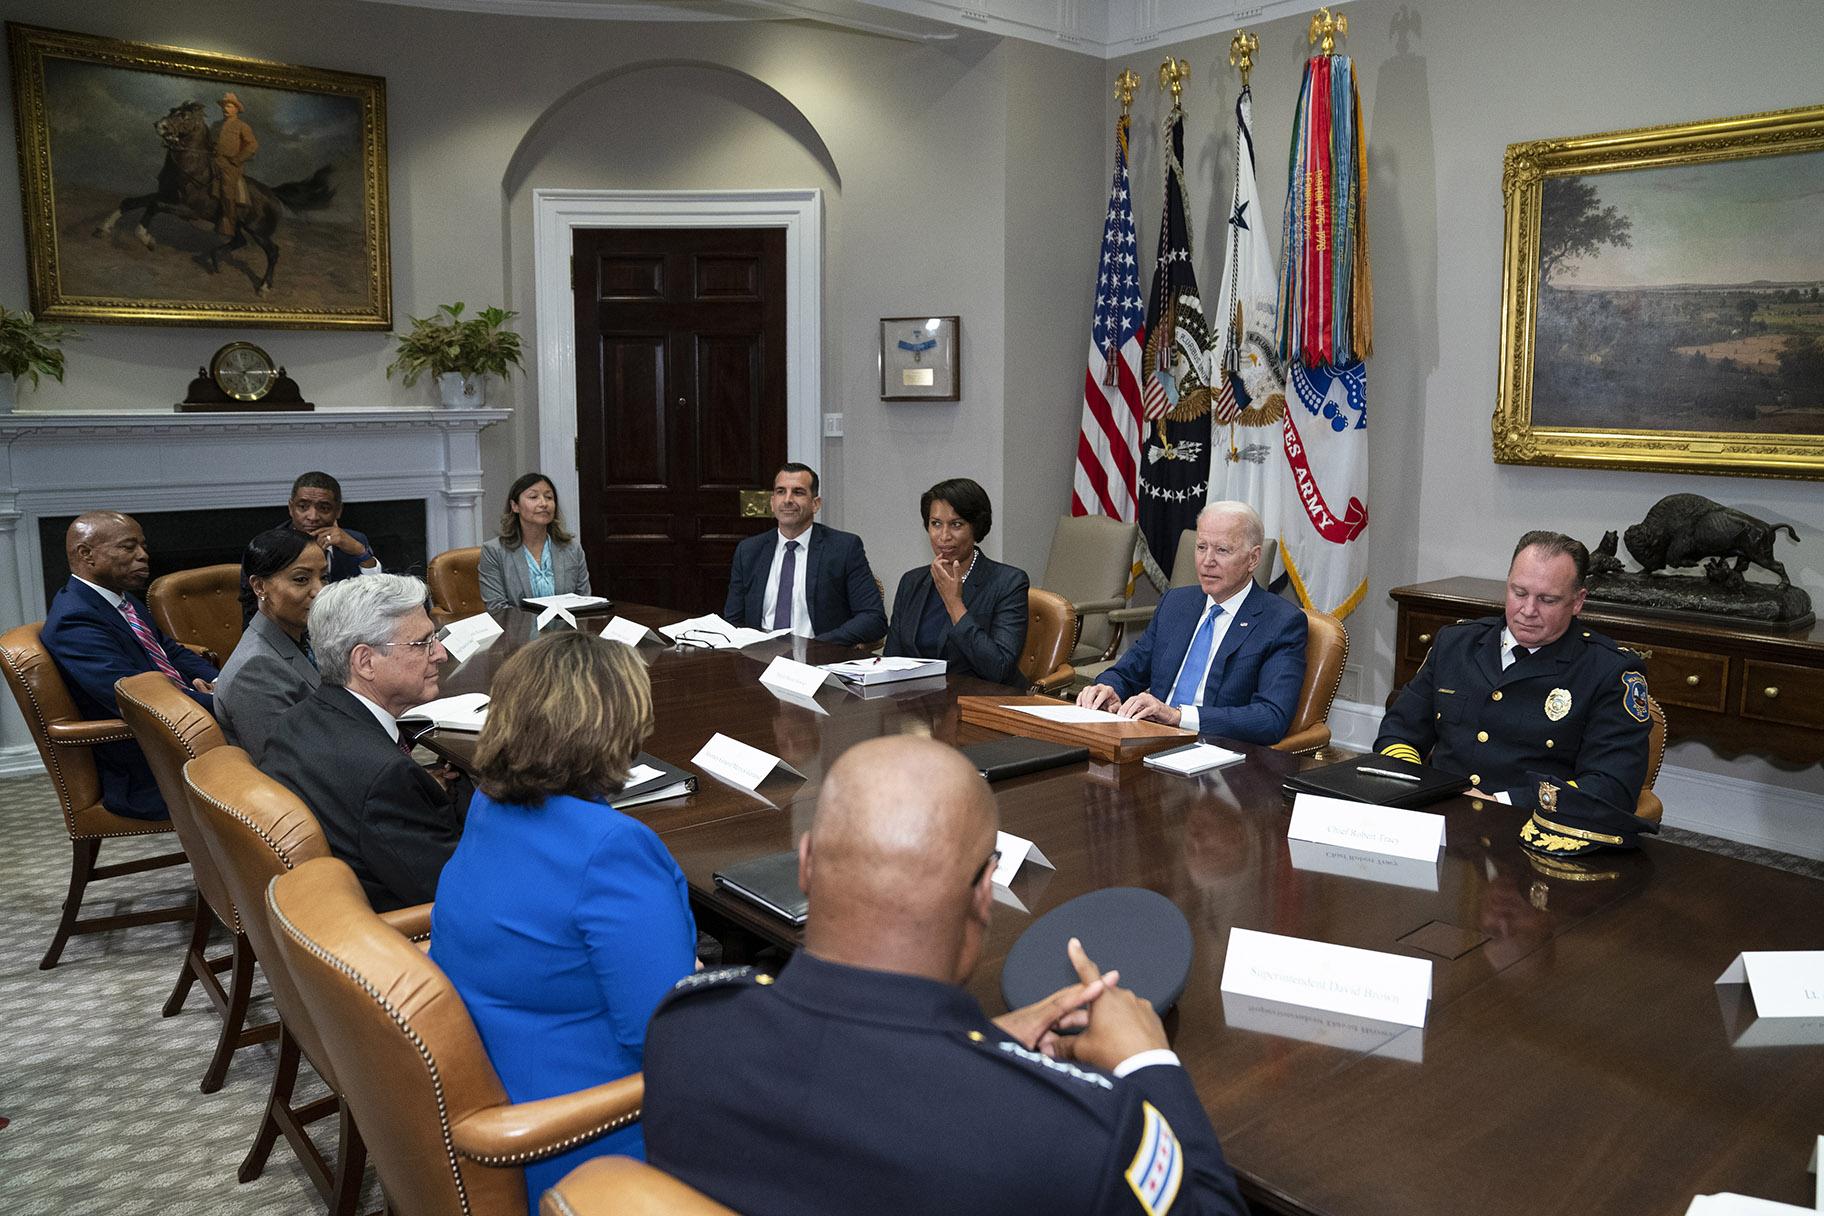 President Joe Biden speaks during a meeting on reducing gun violence, in the Roosevelt Room of the White House, Monday, July 12, 2021, in Washington. Chicago police Superintendent David Brown is visible at center, with his back to the camera. (AP Photo / Evan Vucci)